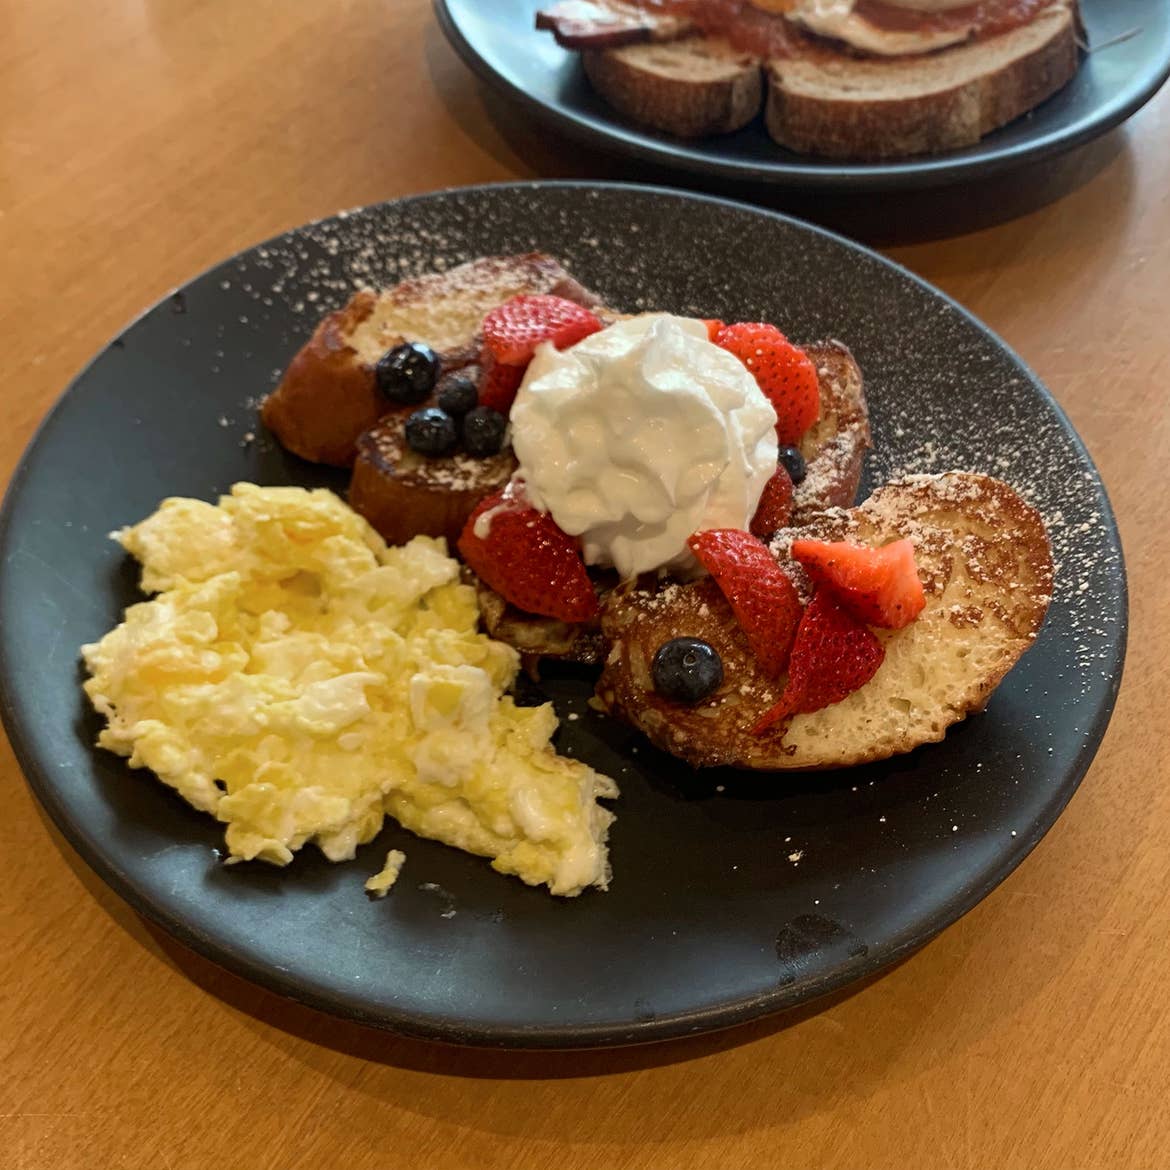 A black plate on a wooden dining table contains scrambled eggs, three french toast slices covered with whipped cream, berries and powdered sugar.